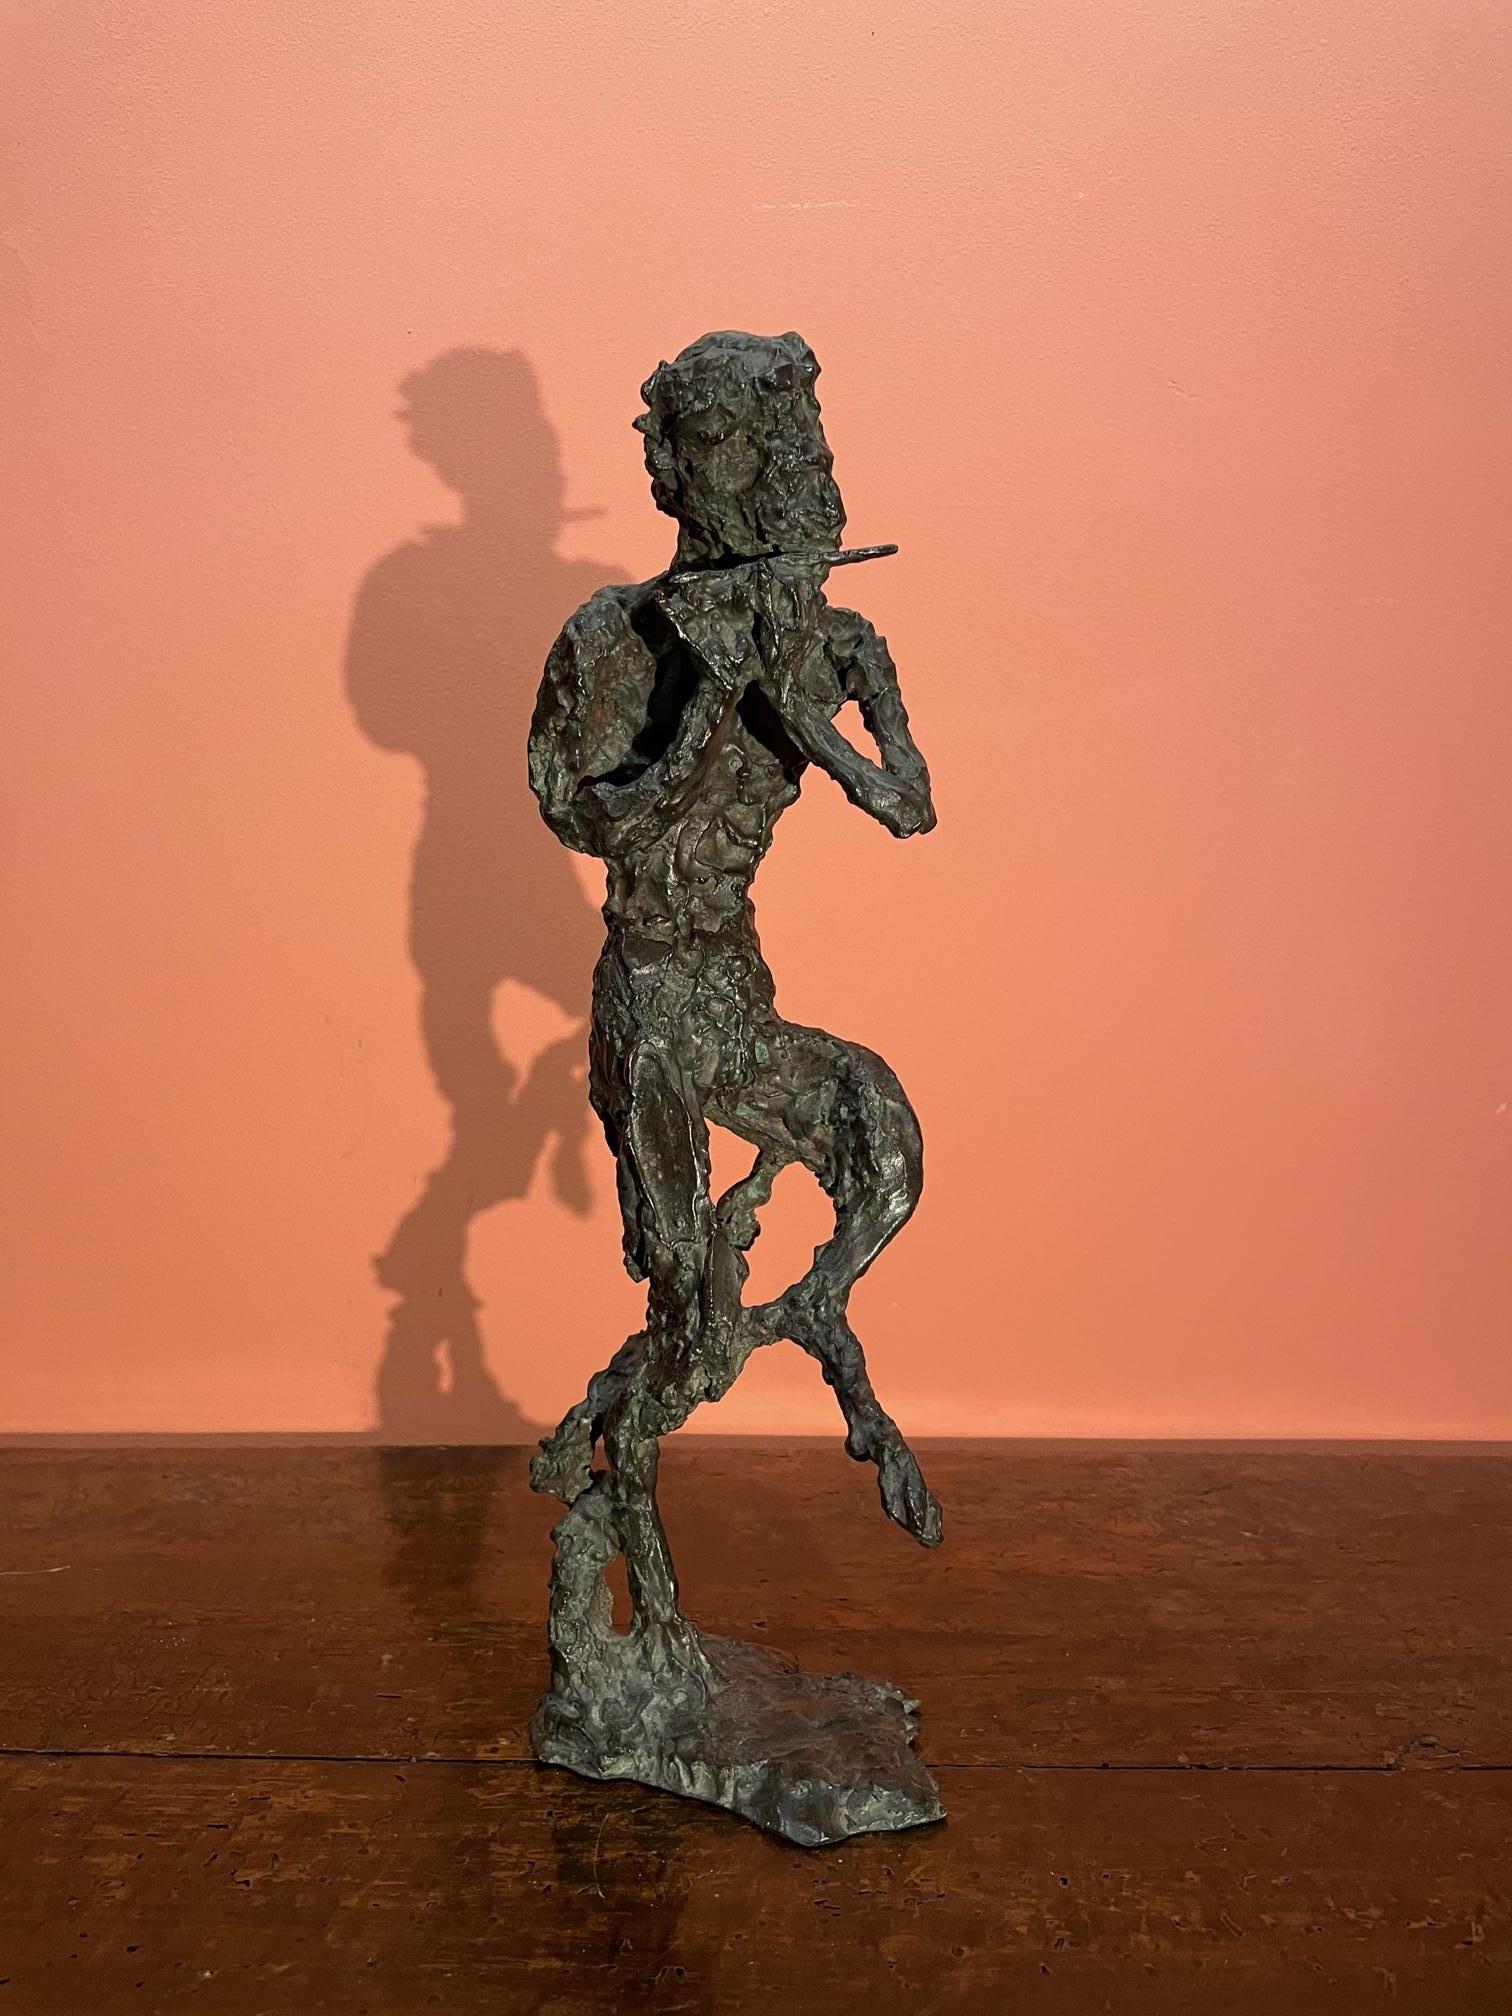 Edmond Moirignot (1913-2002)
Faun playing the flute or Satyr, Before 1959

Godard lost wax, foundry mark
Signed « MOIRIGNOT »

Exhibition Badinier gallery, Paris, december 1963
Exhibition Montmorency gallery, Paris, december 1965
Exhibition